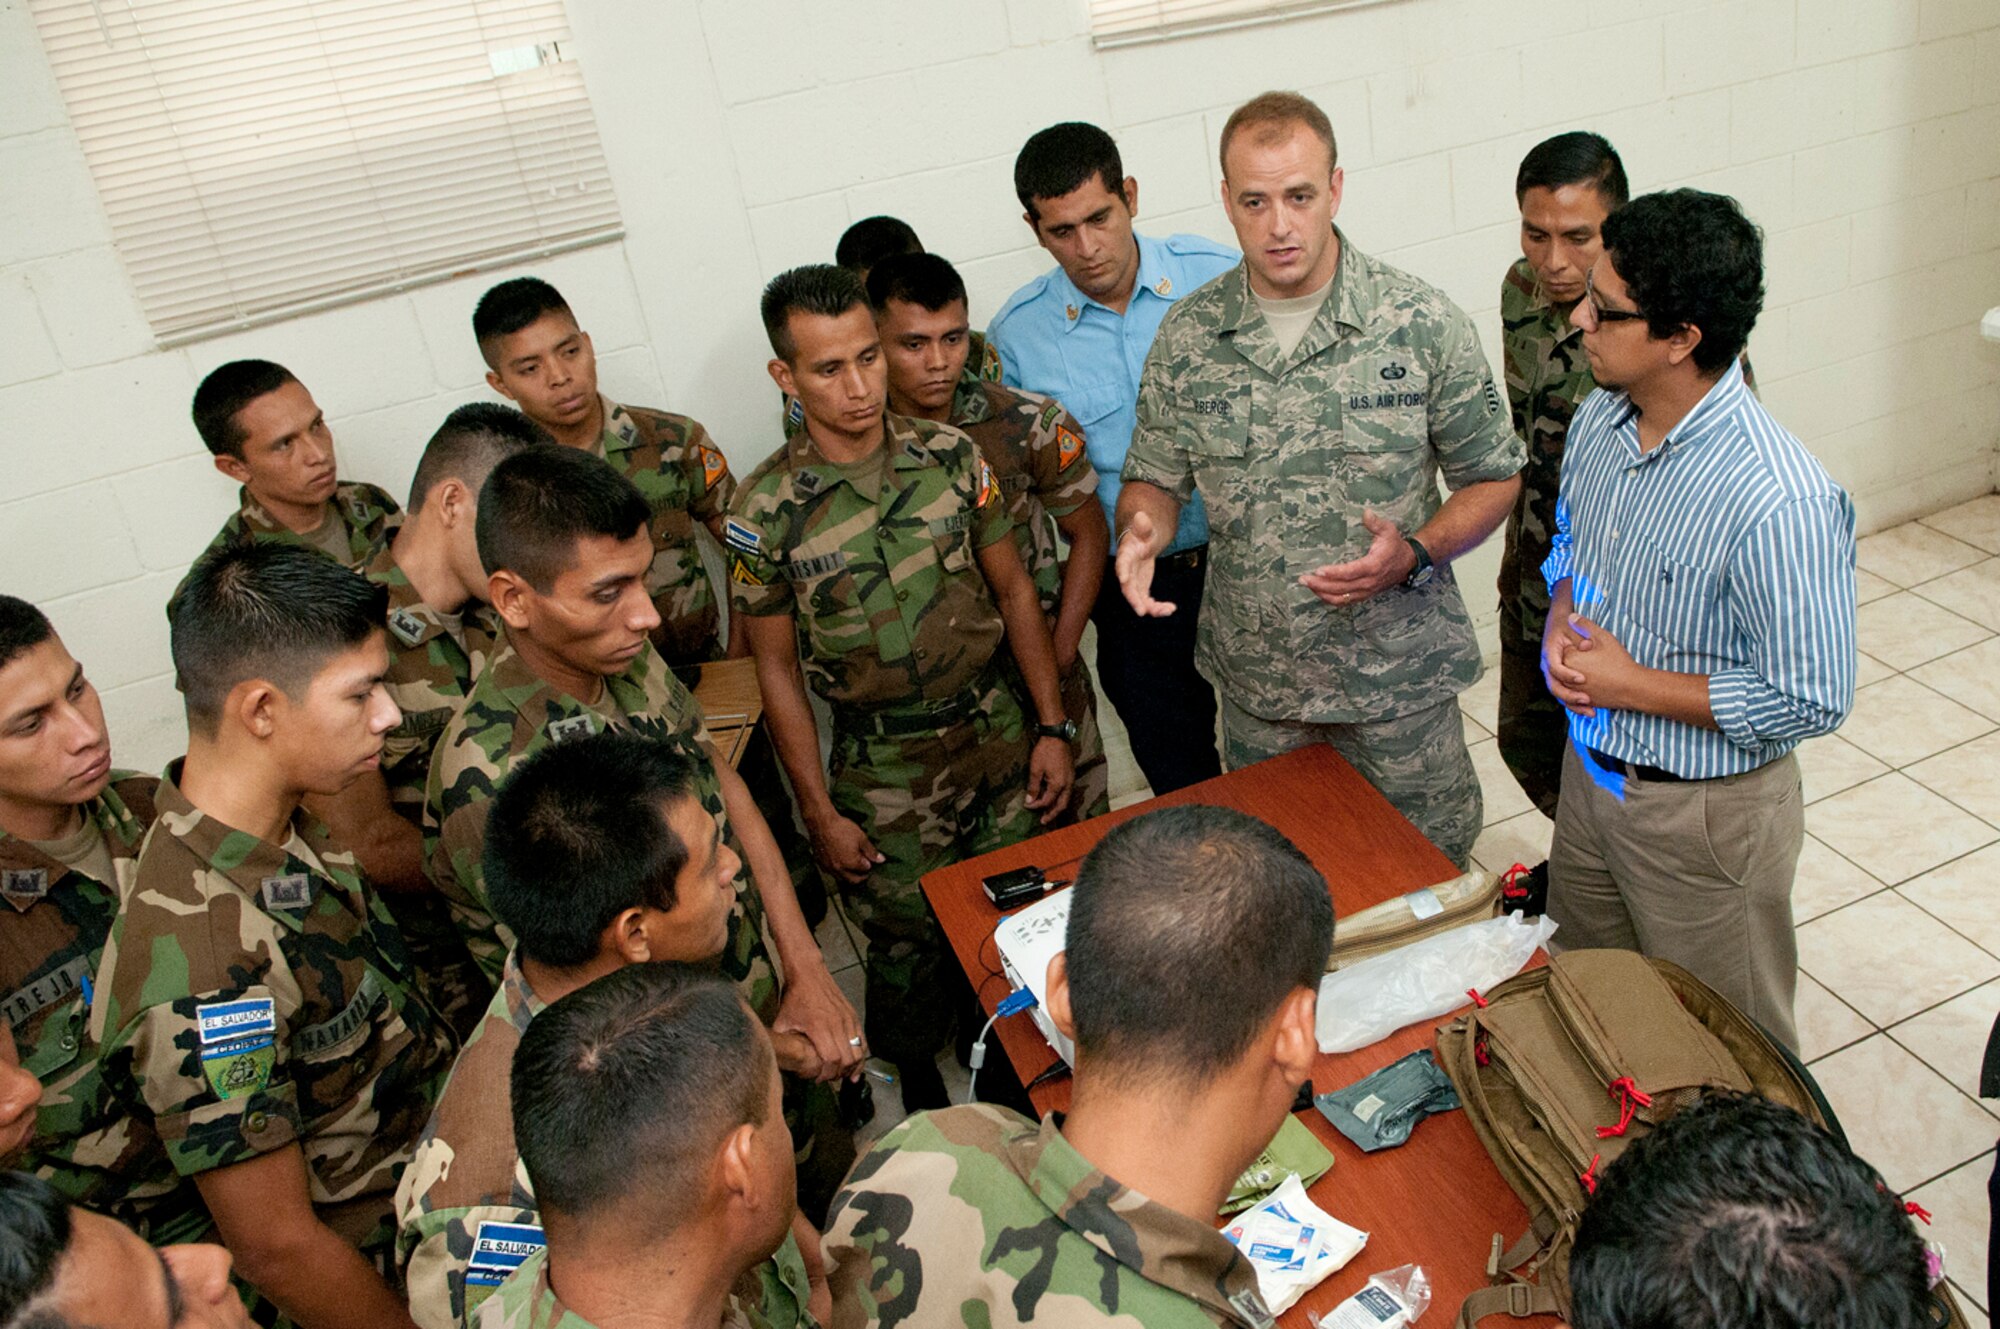 U.S. Air Force Tech. Sgt. Shawn Theberge provides training on the M9 bag and the patient treatment applications that are available during a provider training exchage with members of the Salvadoran Army and other local civil authorities June 26. Five medical personnel from the New Hampshire Air National Guard traveled here to participate in a Chemical Biological Radiological Nuclear High Yield Explosive Enhanced Response Force Package (CERFP) exchange with local authorities. (N.H. National Guard photo by Tech. Sgt. Mark Wyatt/RELEASED)